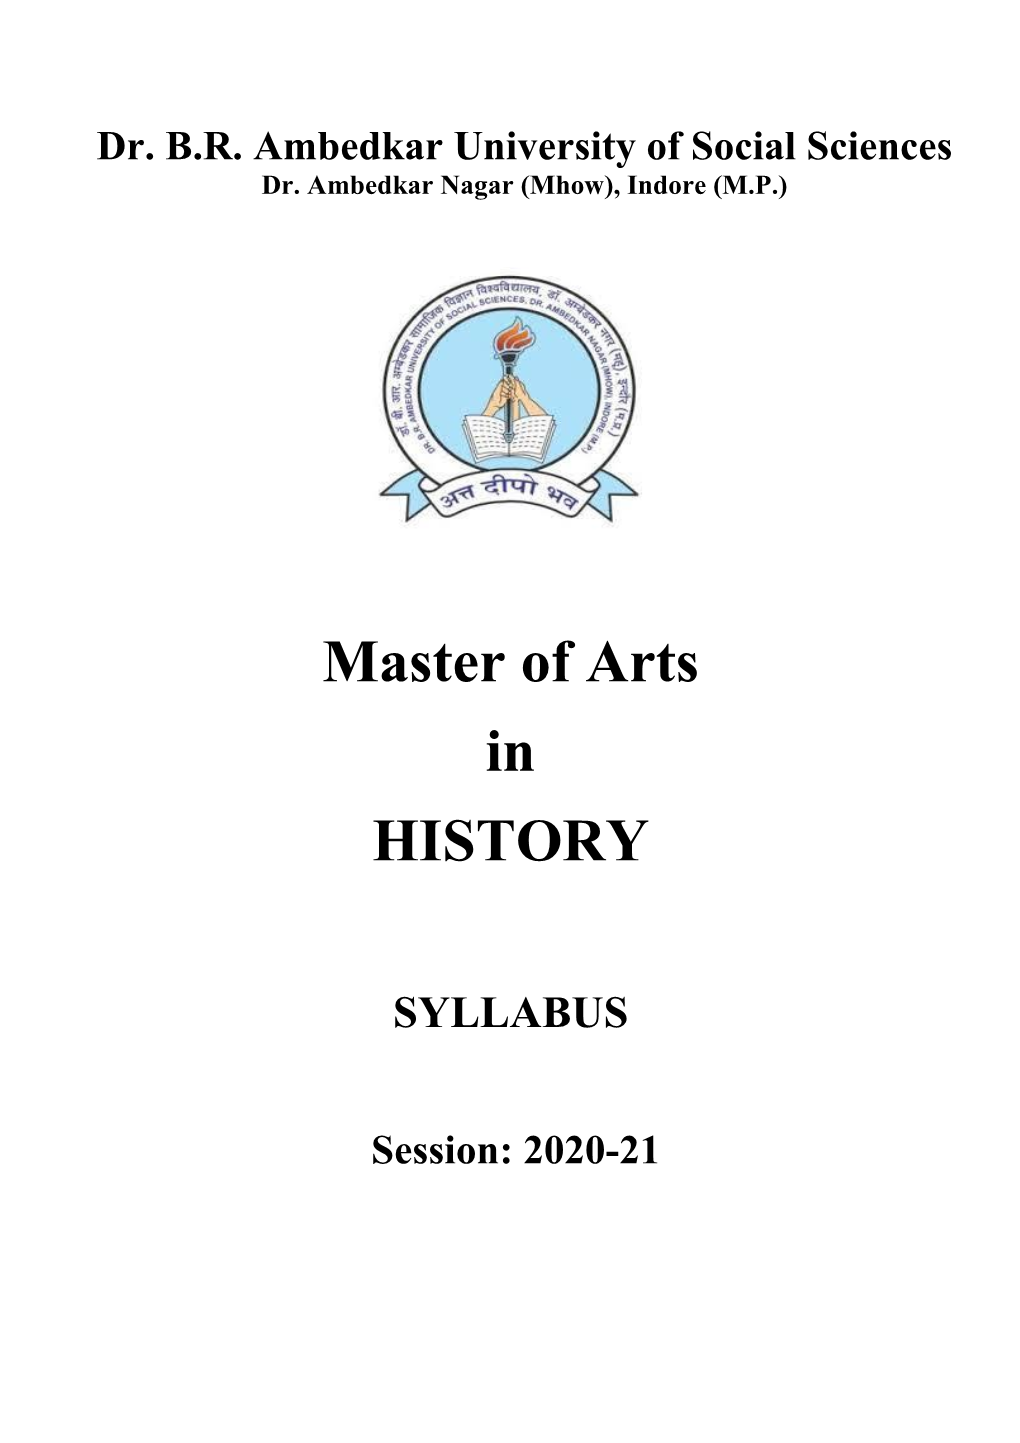 Master of Arts in HISTORY